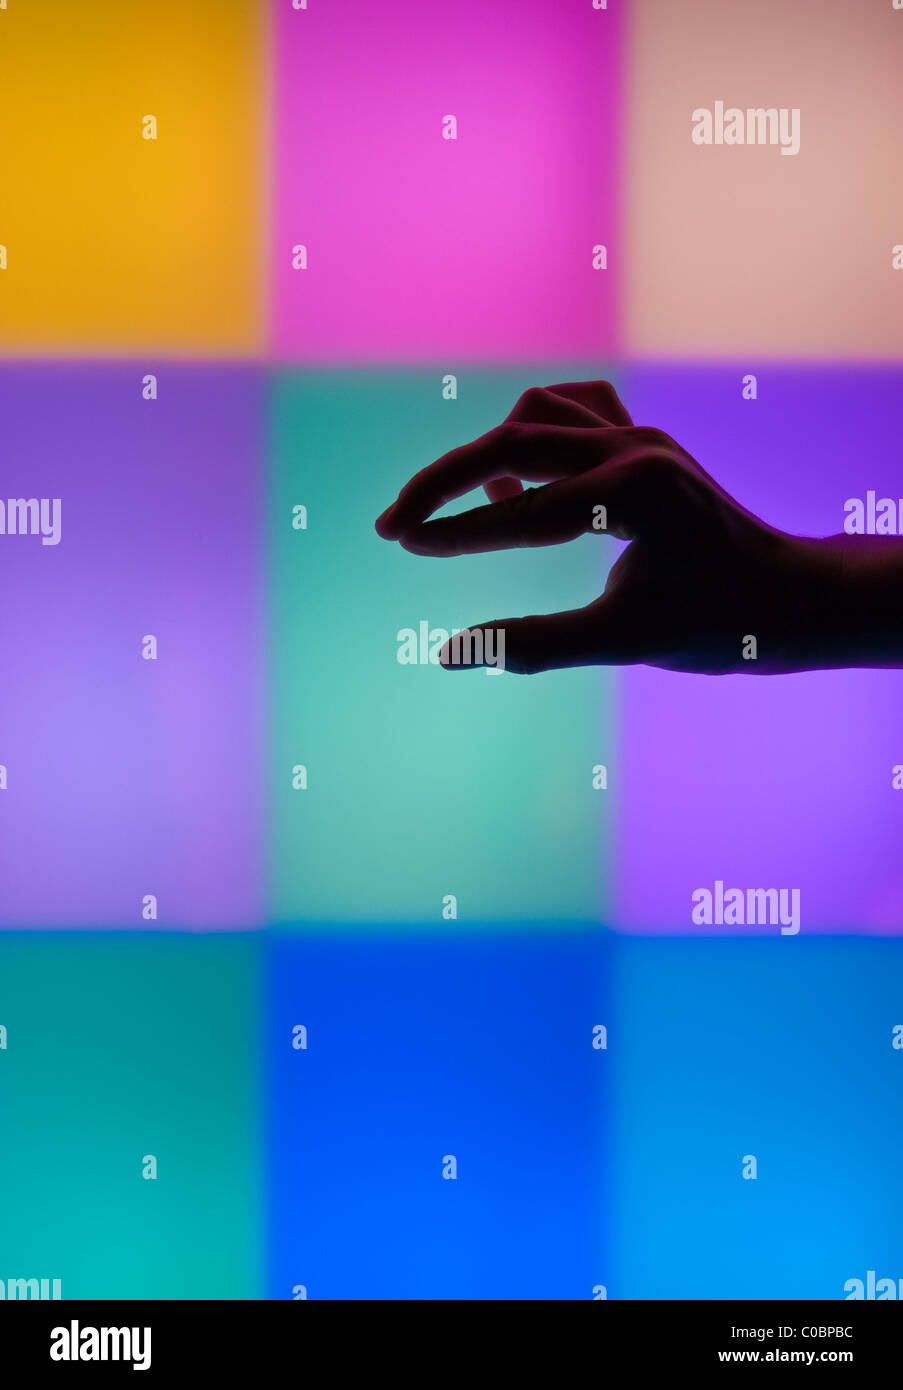 Hand silhouettes in the light sensory room. Stock Photo